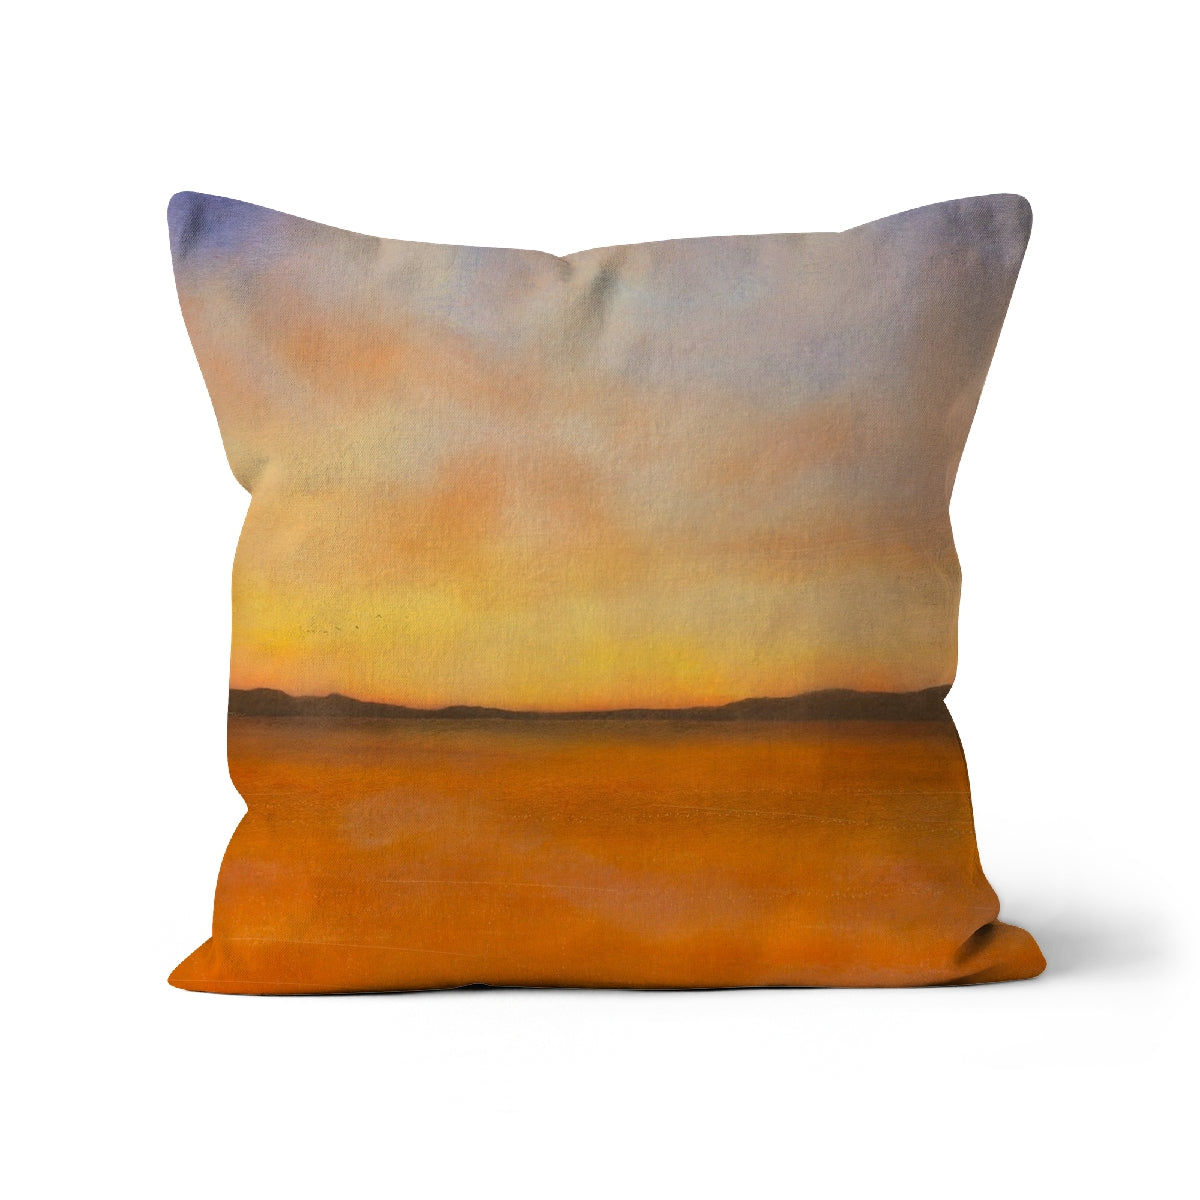 Islay Dawn Art Gifts Cushion-Cushions-Hebridean Islands Art Gallery-Faux Suede-12"x12"-Paintings, Prints, Homeware, Art Gifts From Scotland By Scottish Artist Kevin Hunter